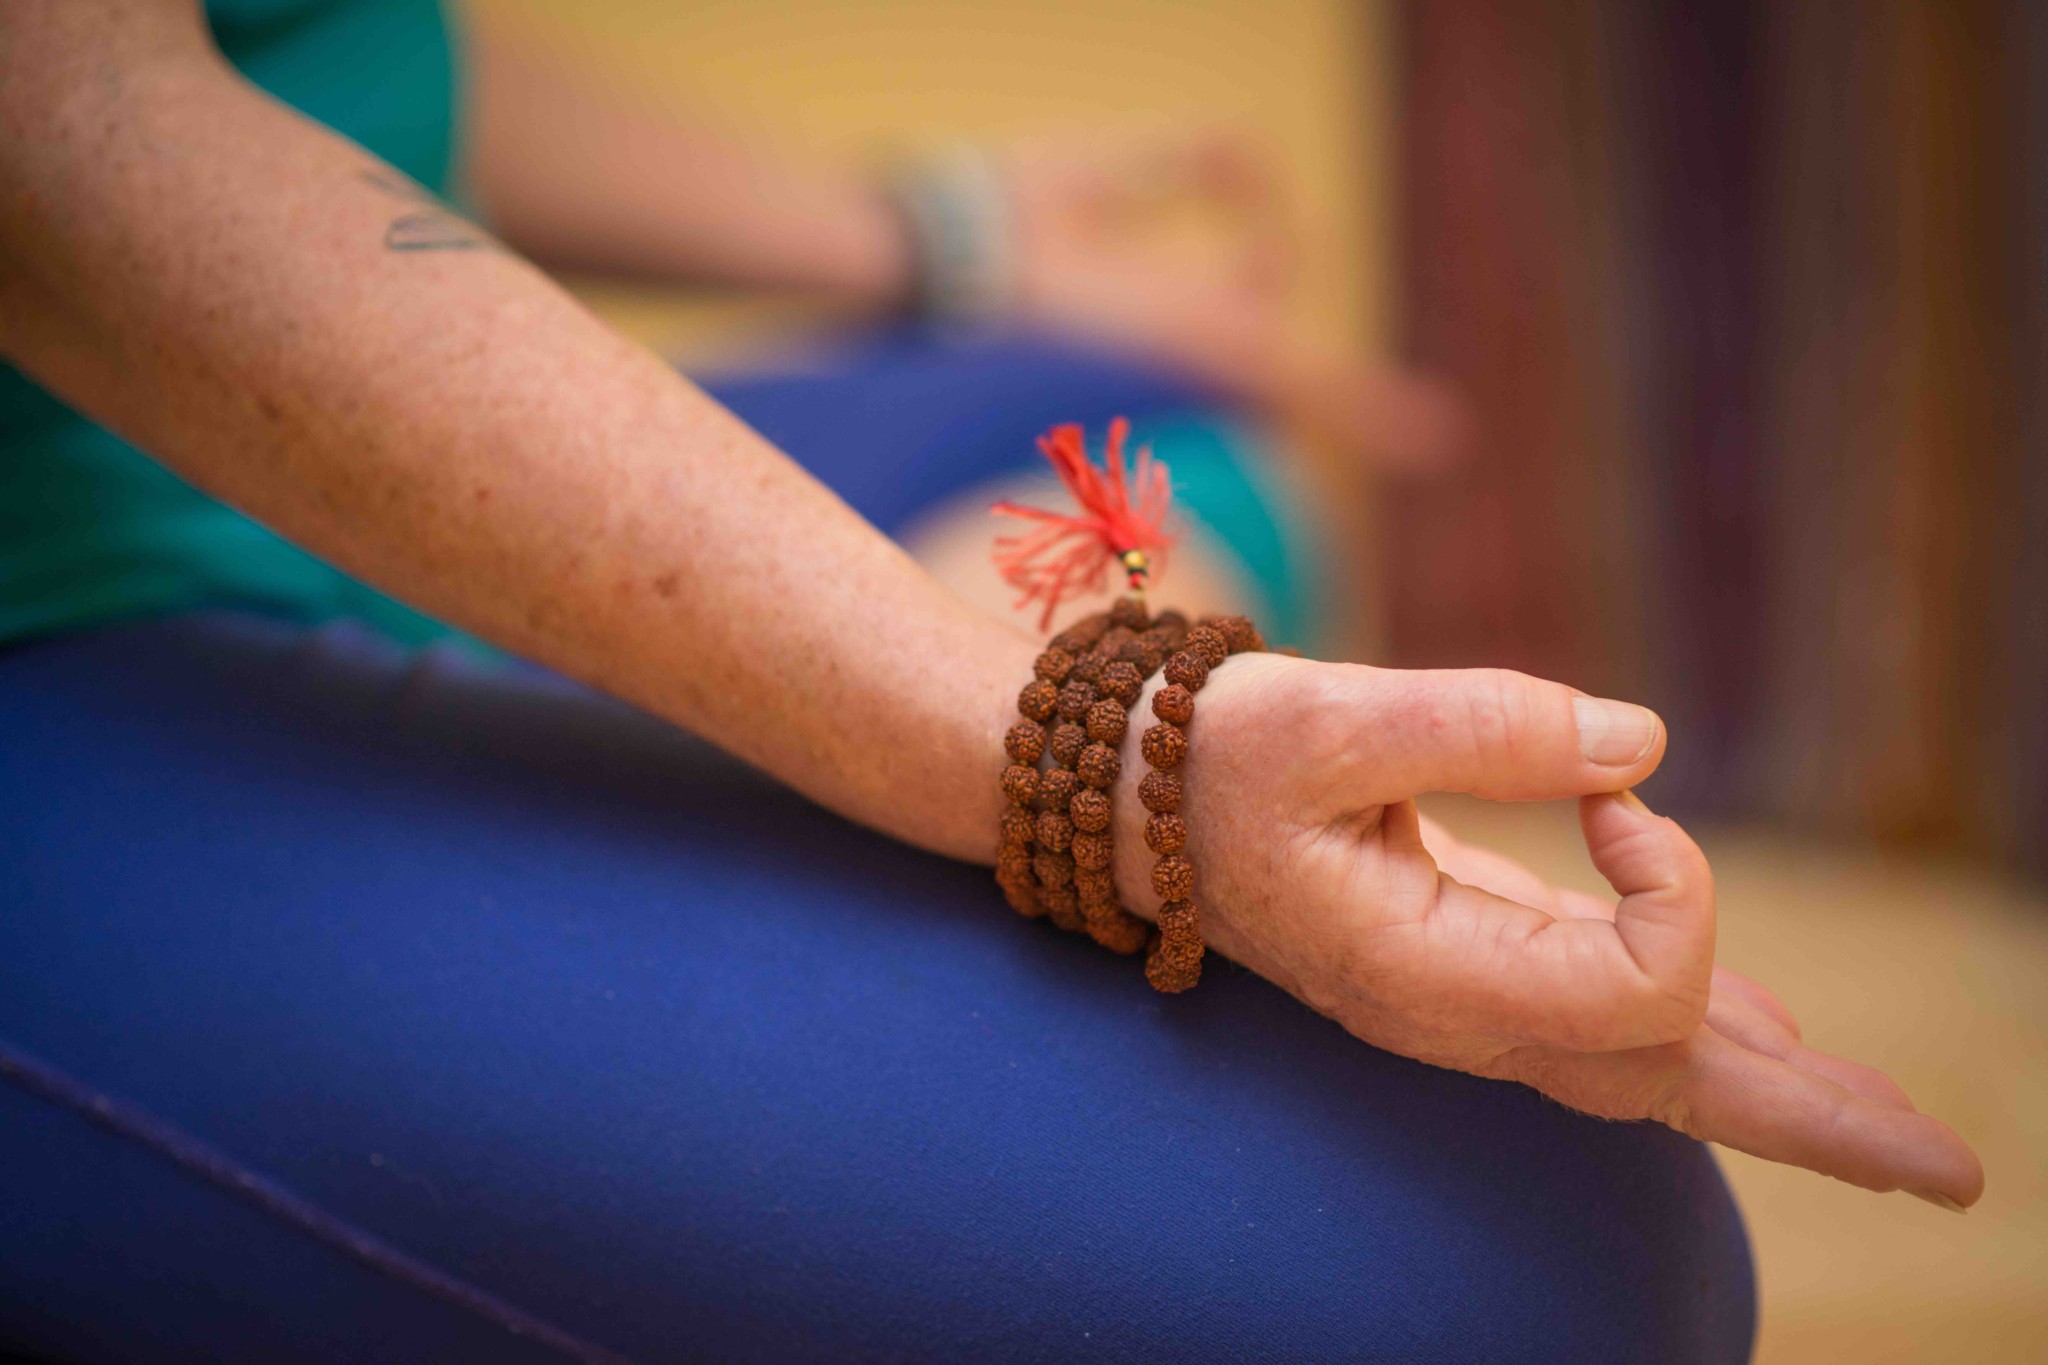 A woman's hands resting on her knees while meditating